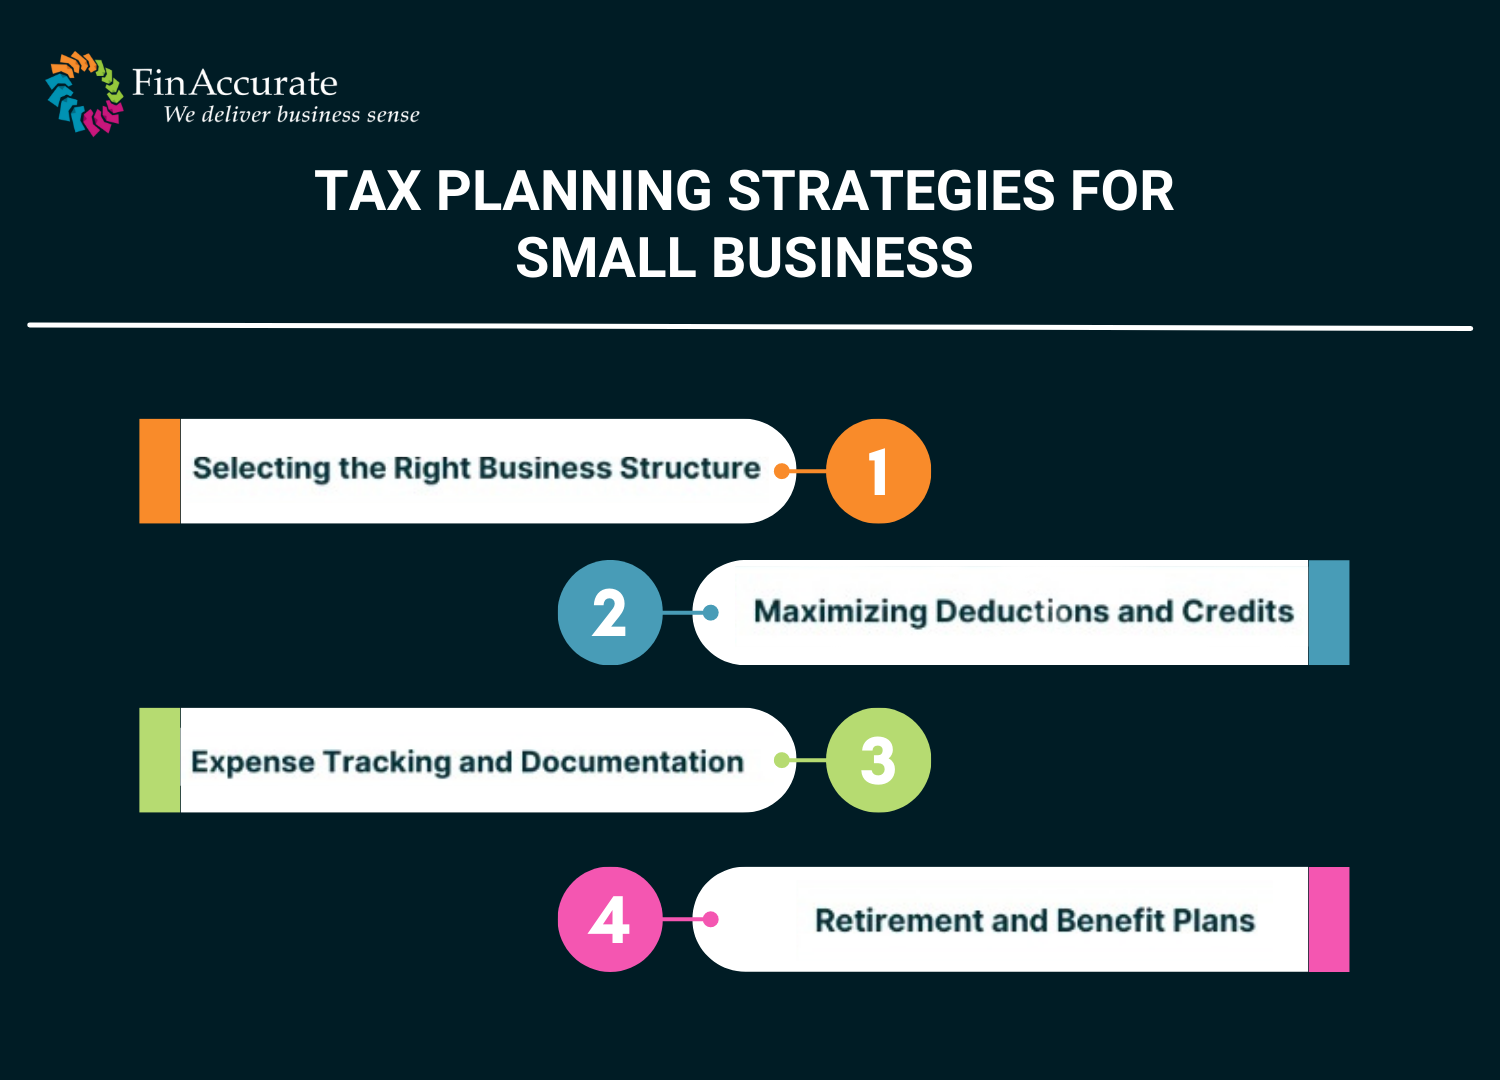 Tax planning strategies for small business